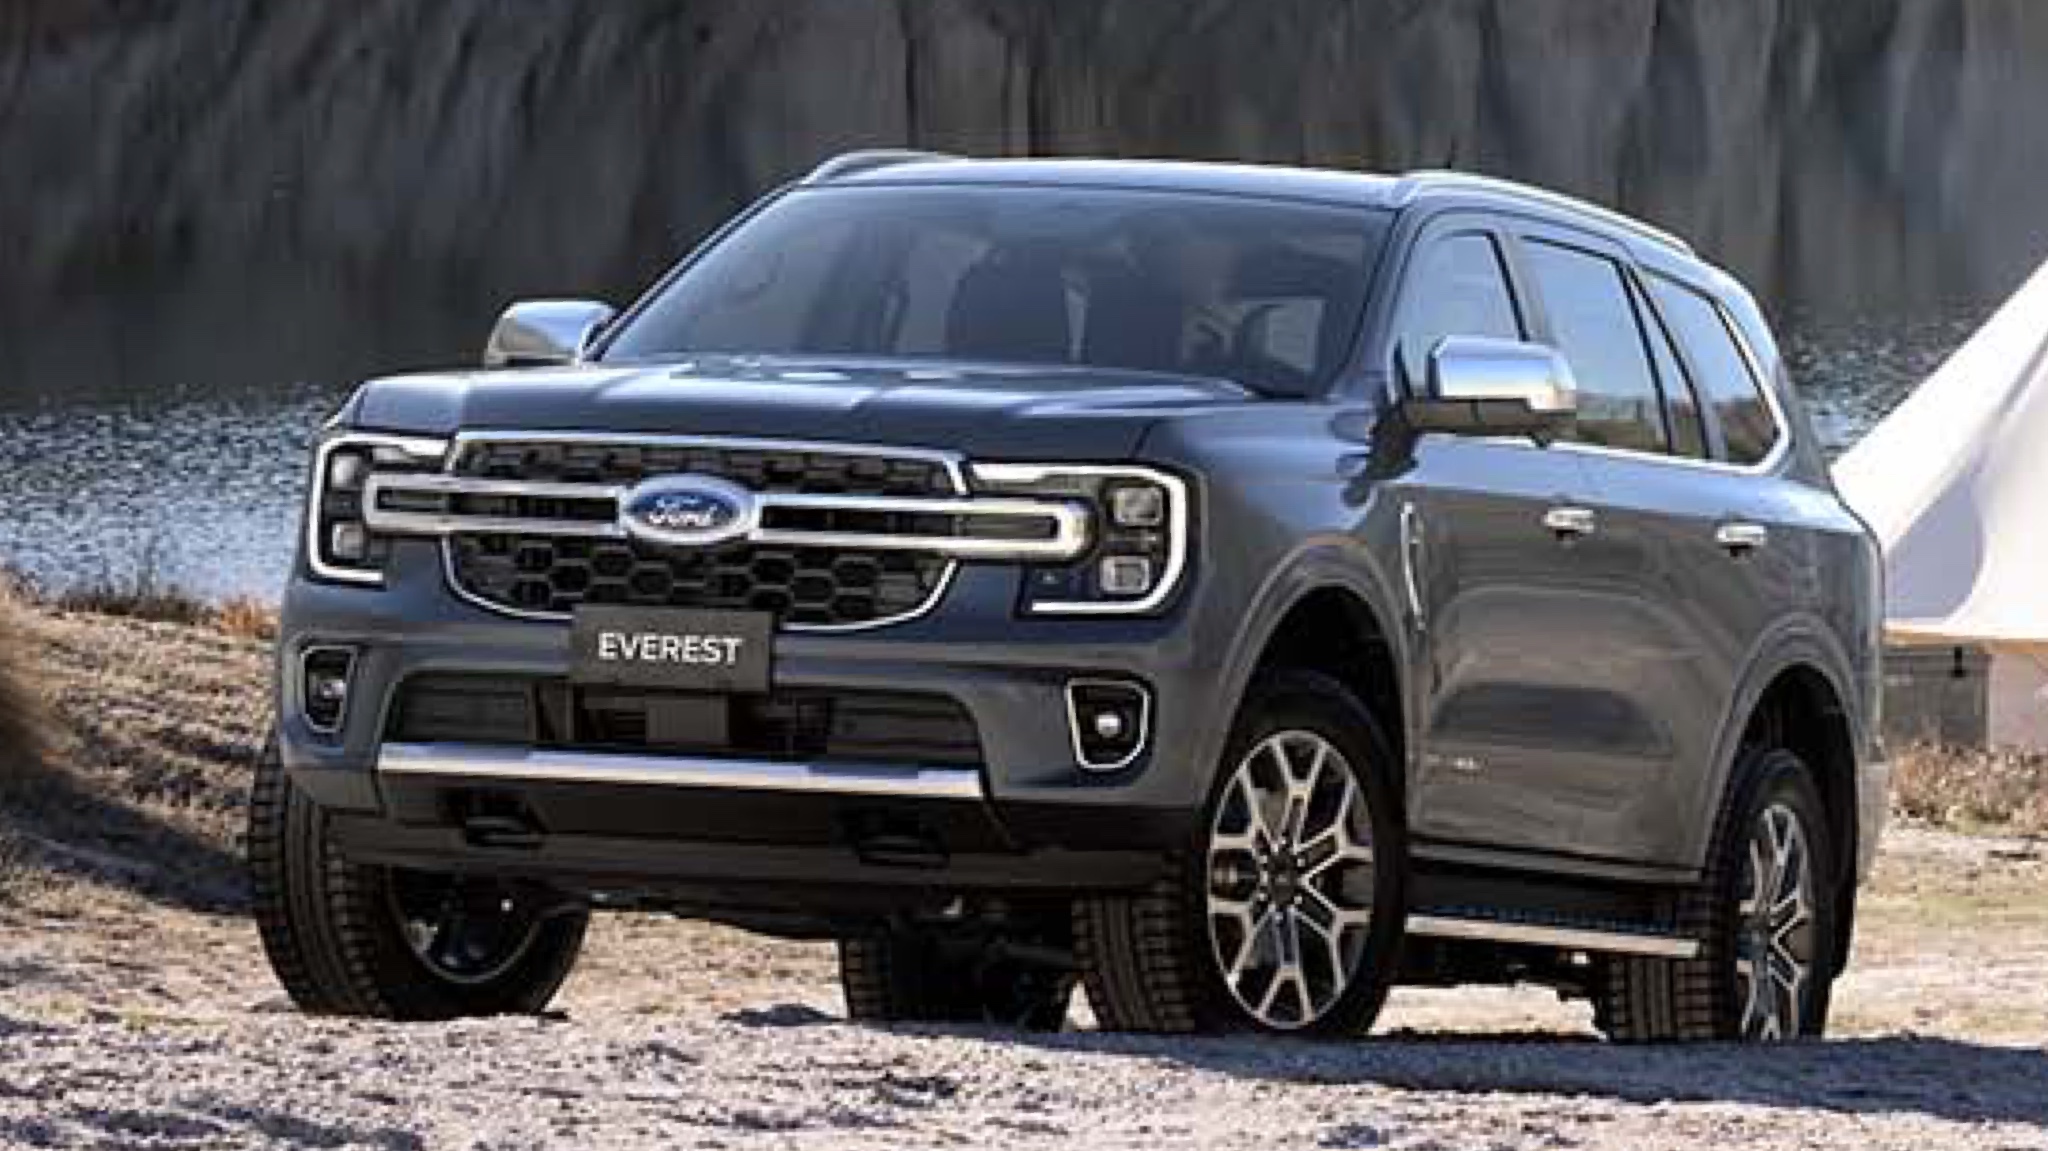 Next Generation 2022 Ford Everest SUV Coming Soon in Batangas Philippines